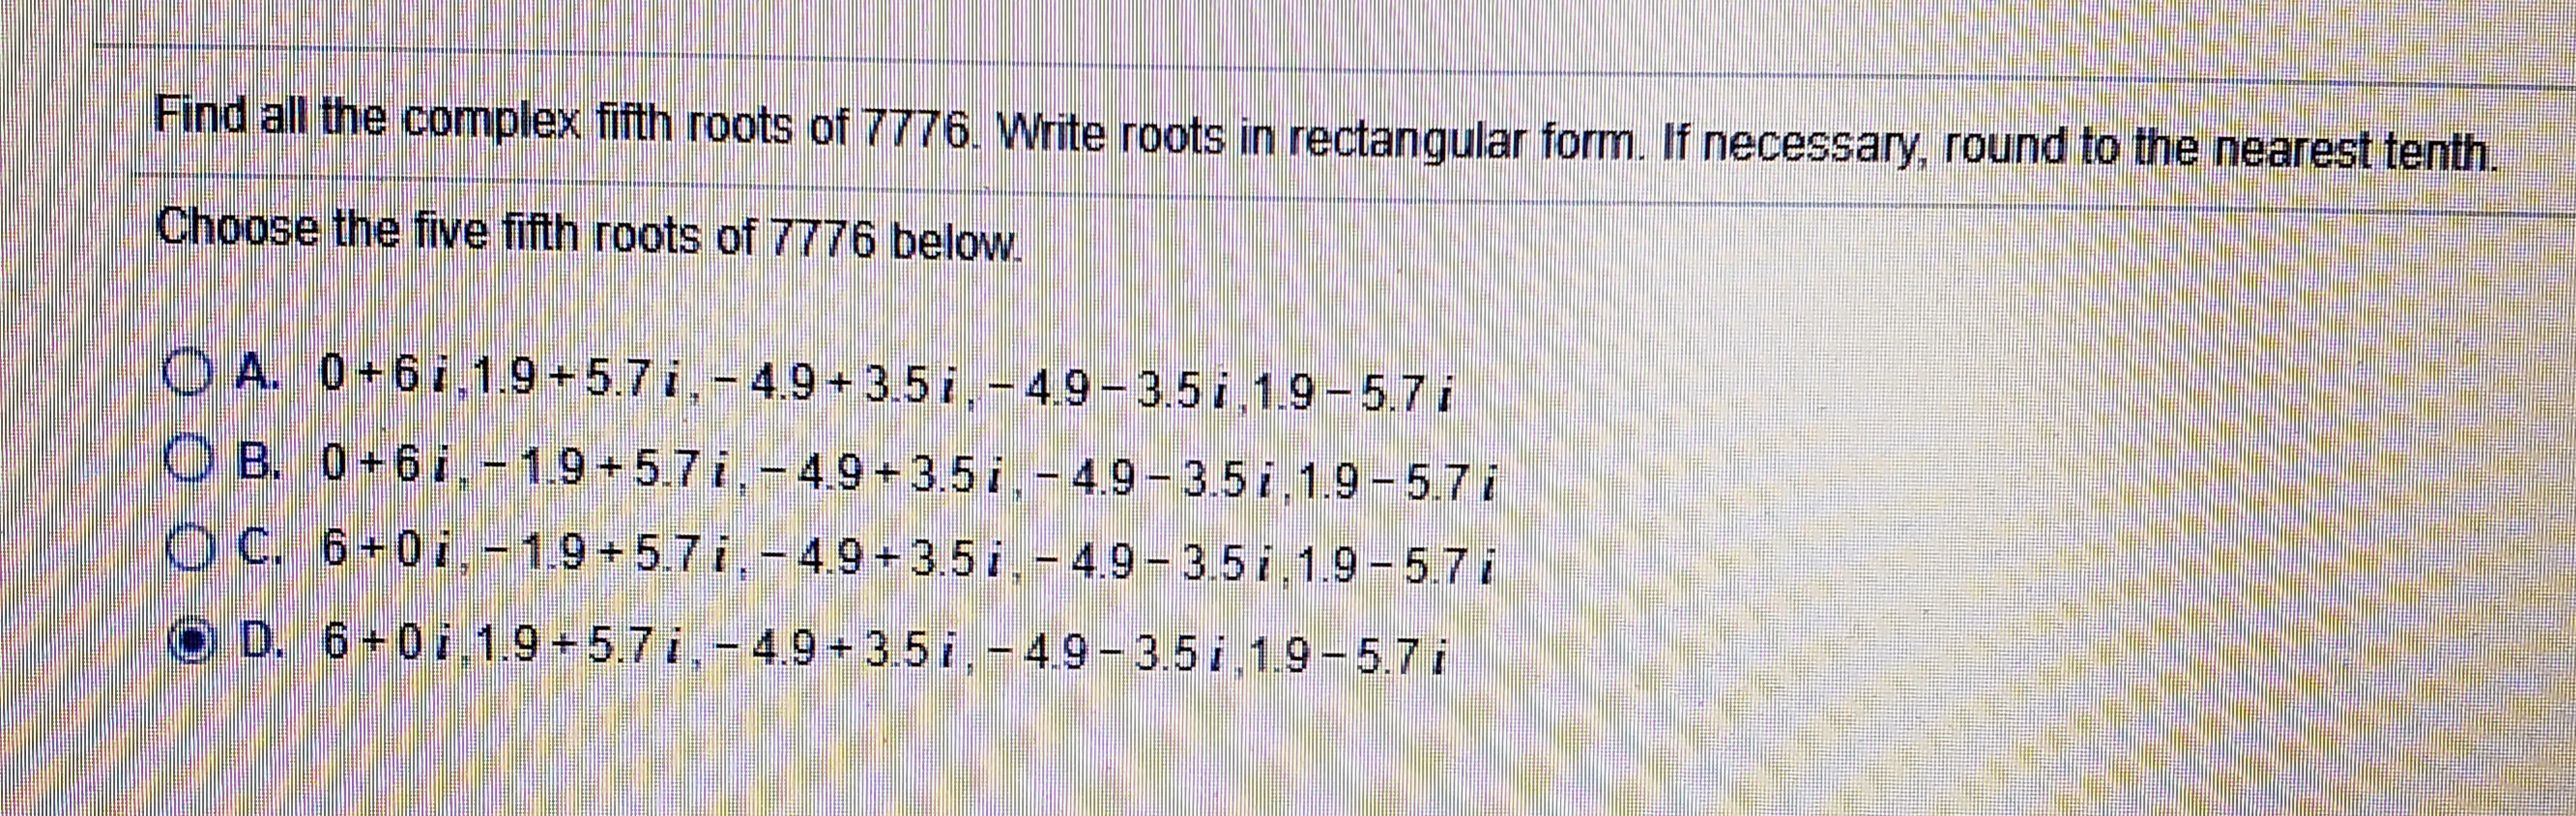 Find all the complex fifth roots of 7776. Write roots in rectangular form. If necessary, round to the nearest tenth.
Choose the five fifth roots of 7776 below.
O A. 0+6i.1.9+5.7i,-4.9 + 3.5 i,-49-3.5 i,1.9-5.7i
O B. 0+6i.-1.9+5.7 i,-4.9+3.5i,-4.9-3.5 i,1.9 -5.7i
OC. 6+0i.-1.9+5.7i,-4.9+3.5 i.- 4.9- 3.5i 1.9-5.7i
O D. 6+07.1.9+5.7 i,- 4.9 + 3.5 i,-49- 3.5 i.1.9-5.7 i
